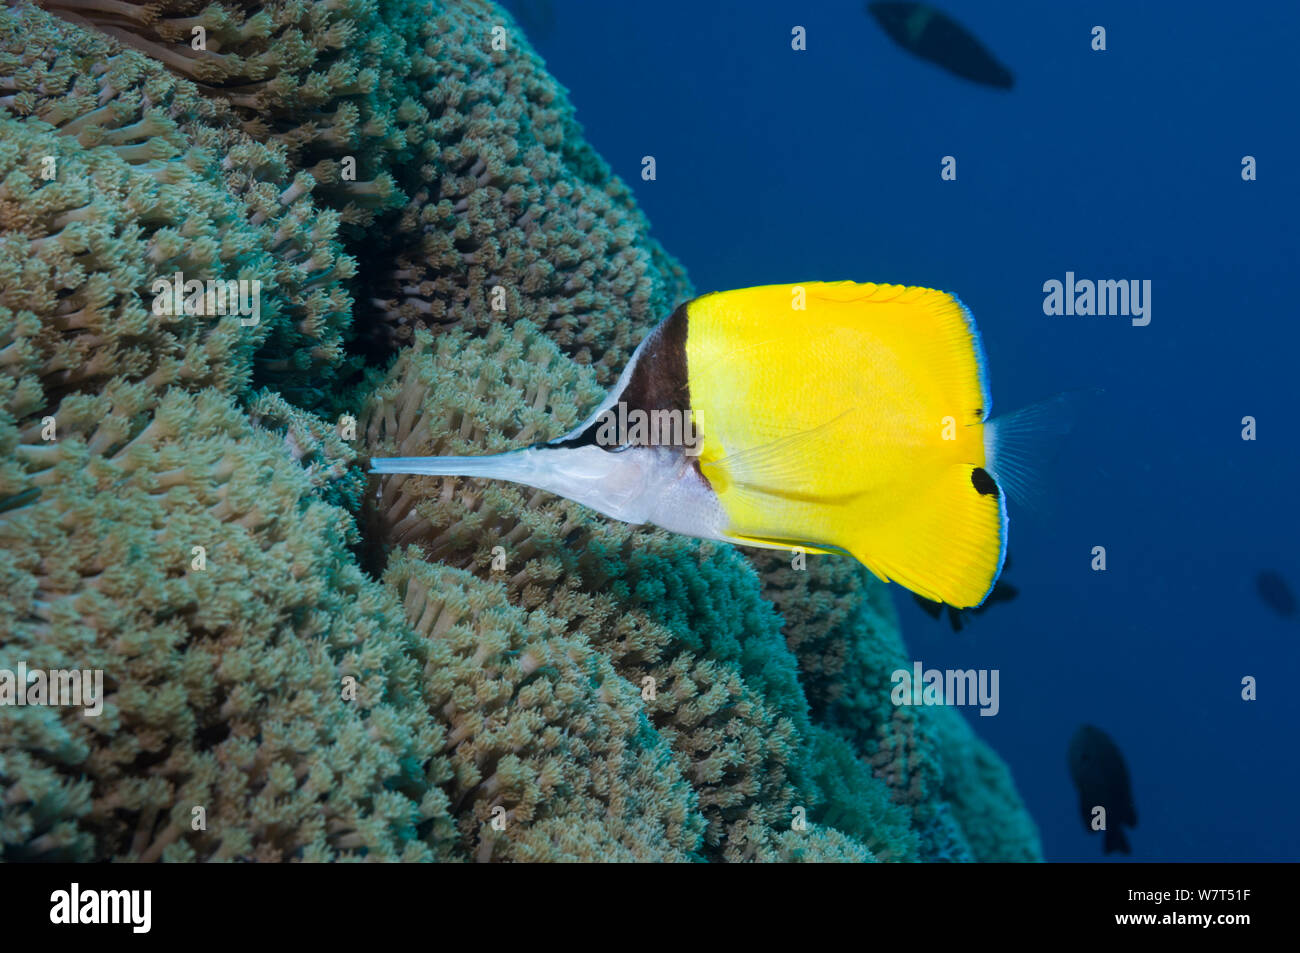 Long-nosed butterflyfish (Forcipiger flavissimus) Lembeh Strait, North Sulawesi, Indonesia. Stock Photo